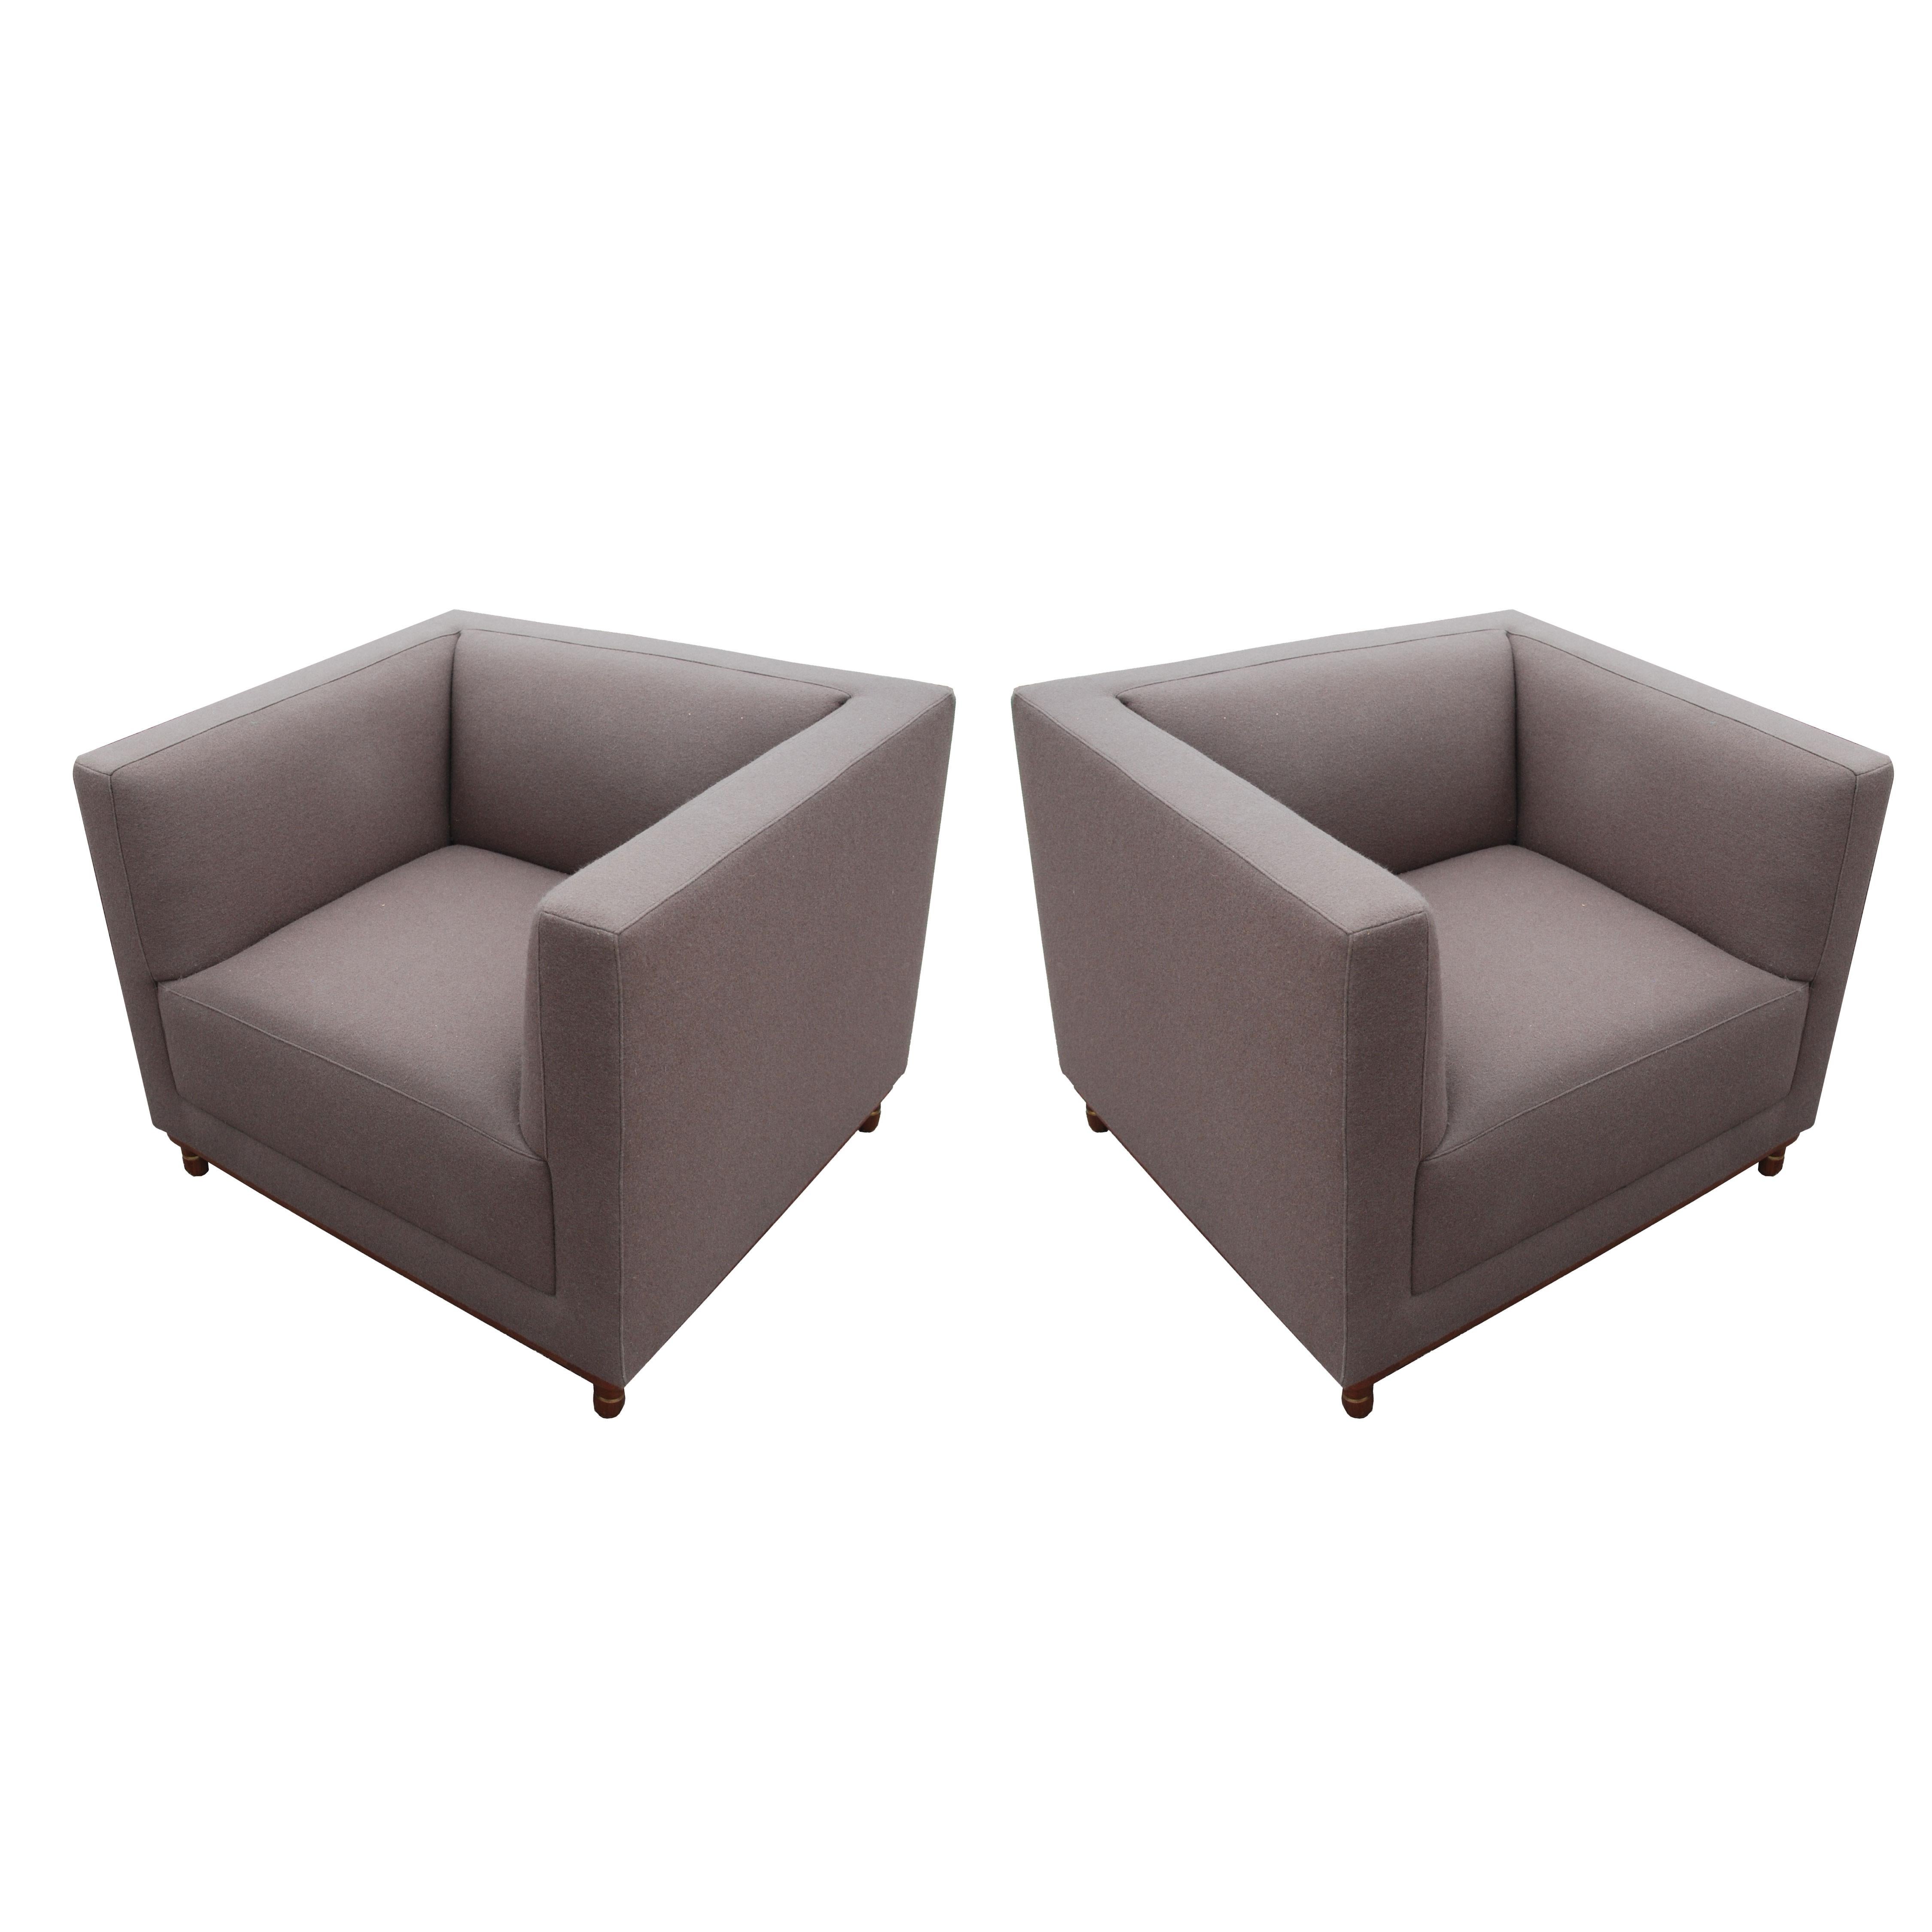 Pair of Mills by Bernhardt lounge chairs
Jephson Robb
2013

Lightly used floor models. 
Fully upholstered and features a solid walnut base with a bronze finish metal ring detail on the legs. 
 
 
Measures: 33.5